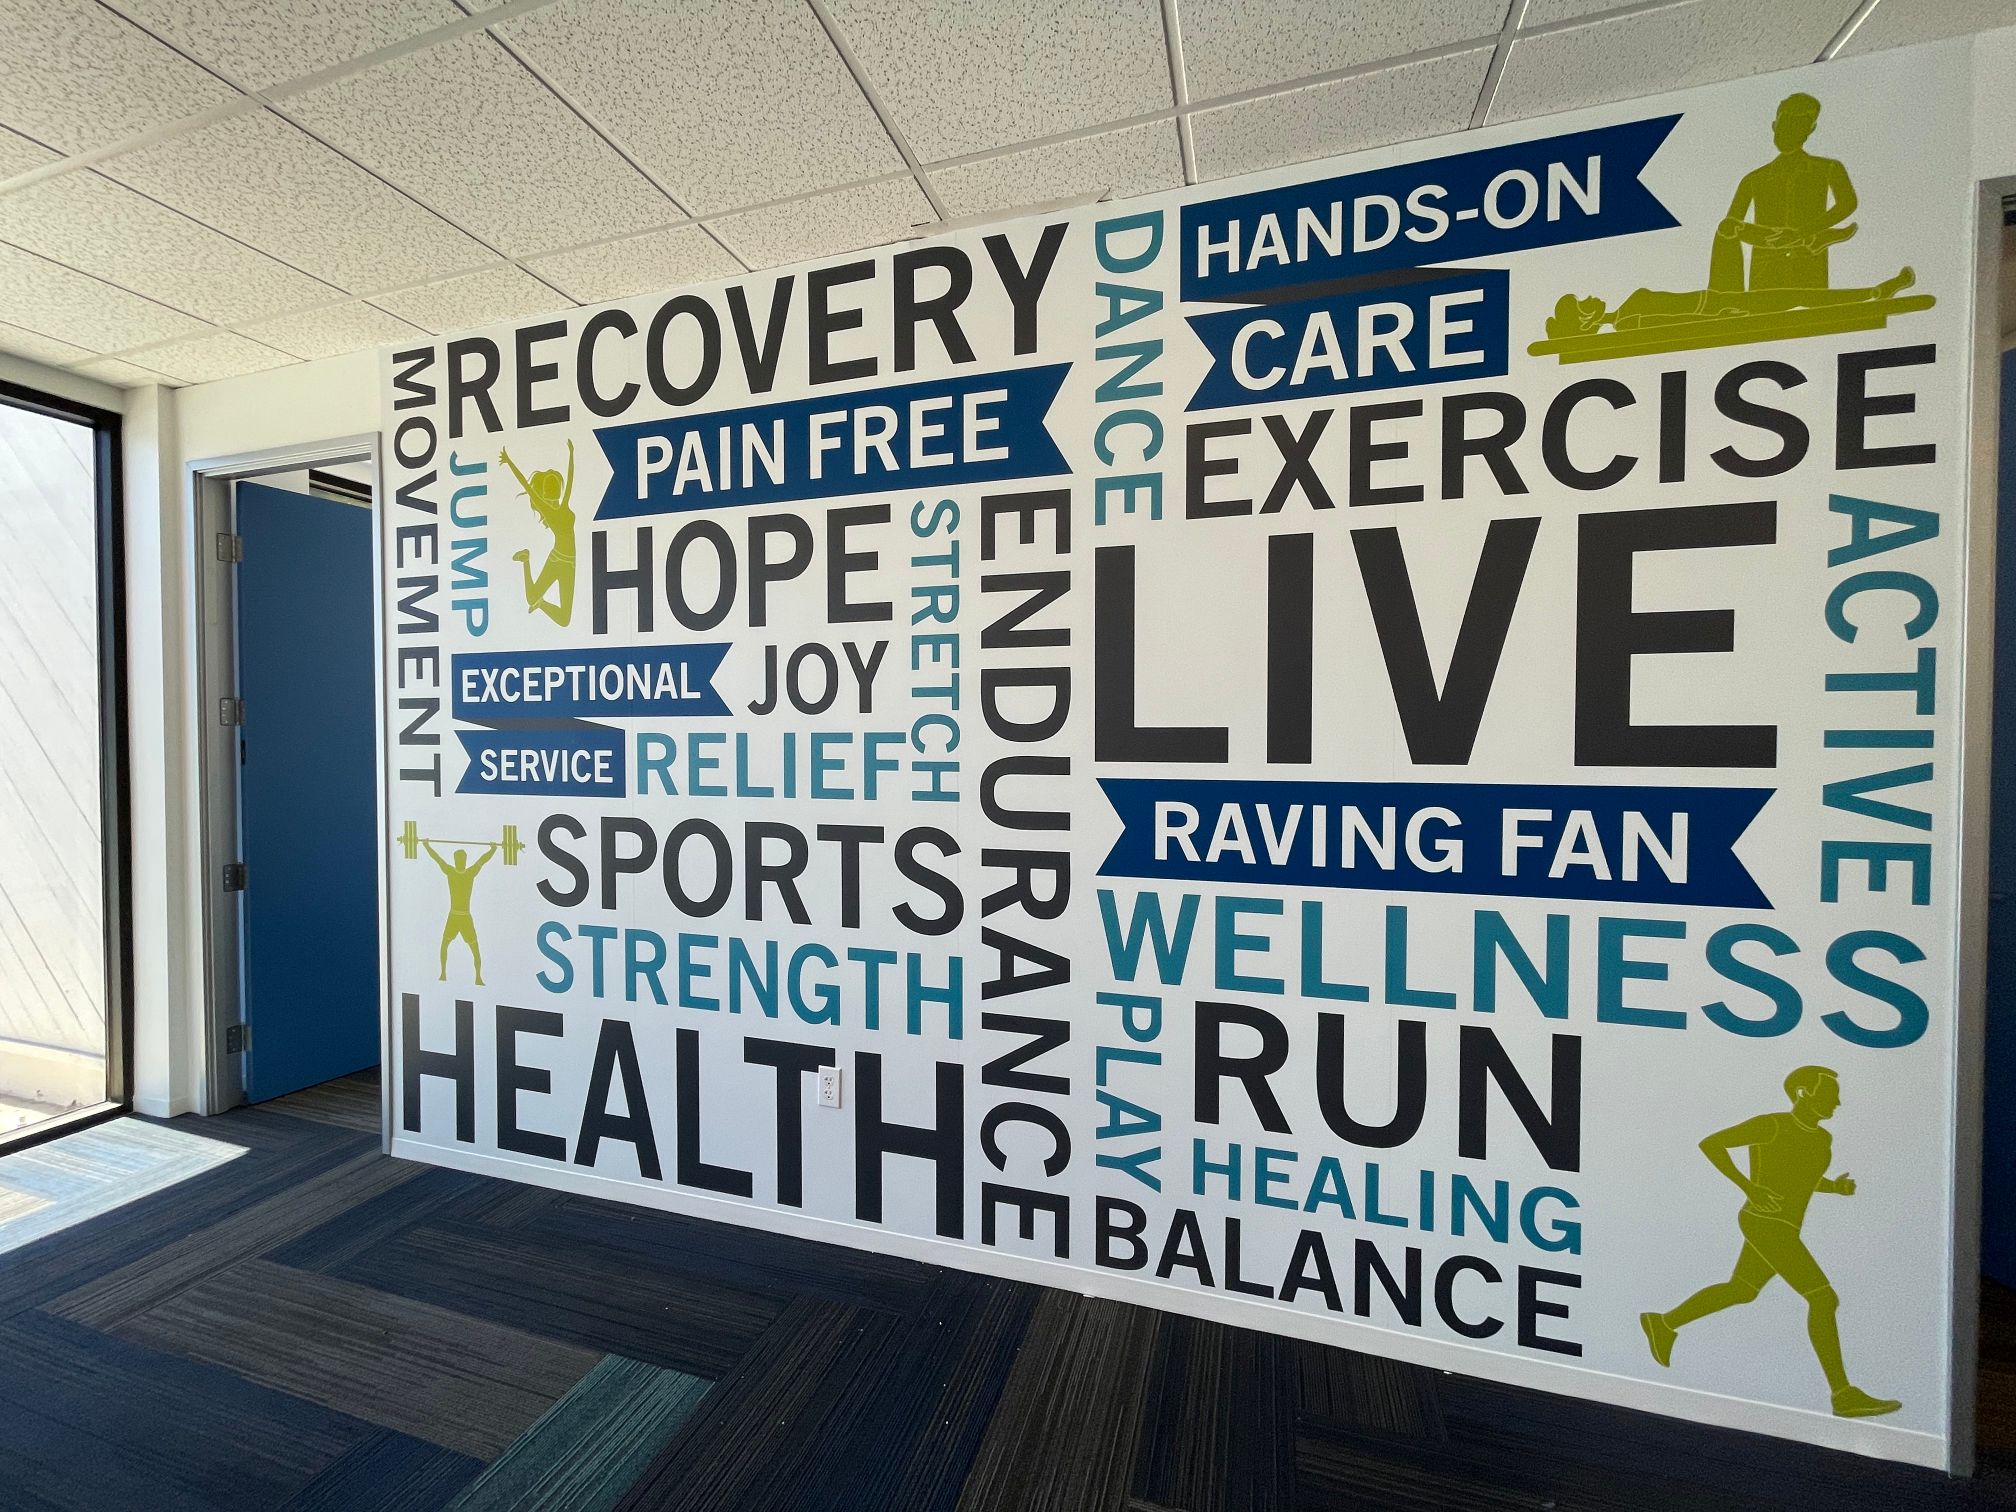 Custom Designed Wall Graphics Printed and Installed for Commercial Customers in Orange County CA